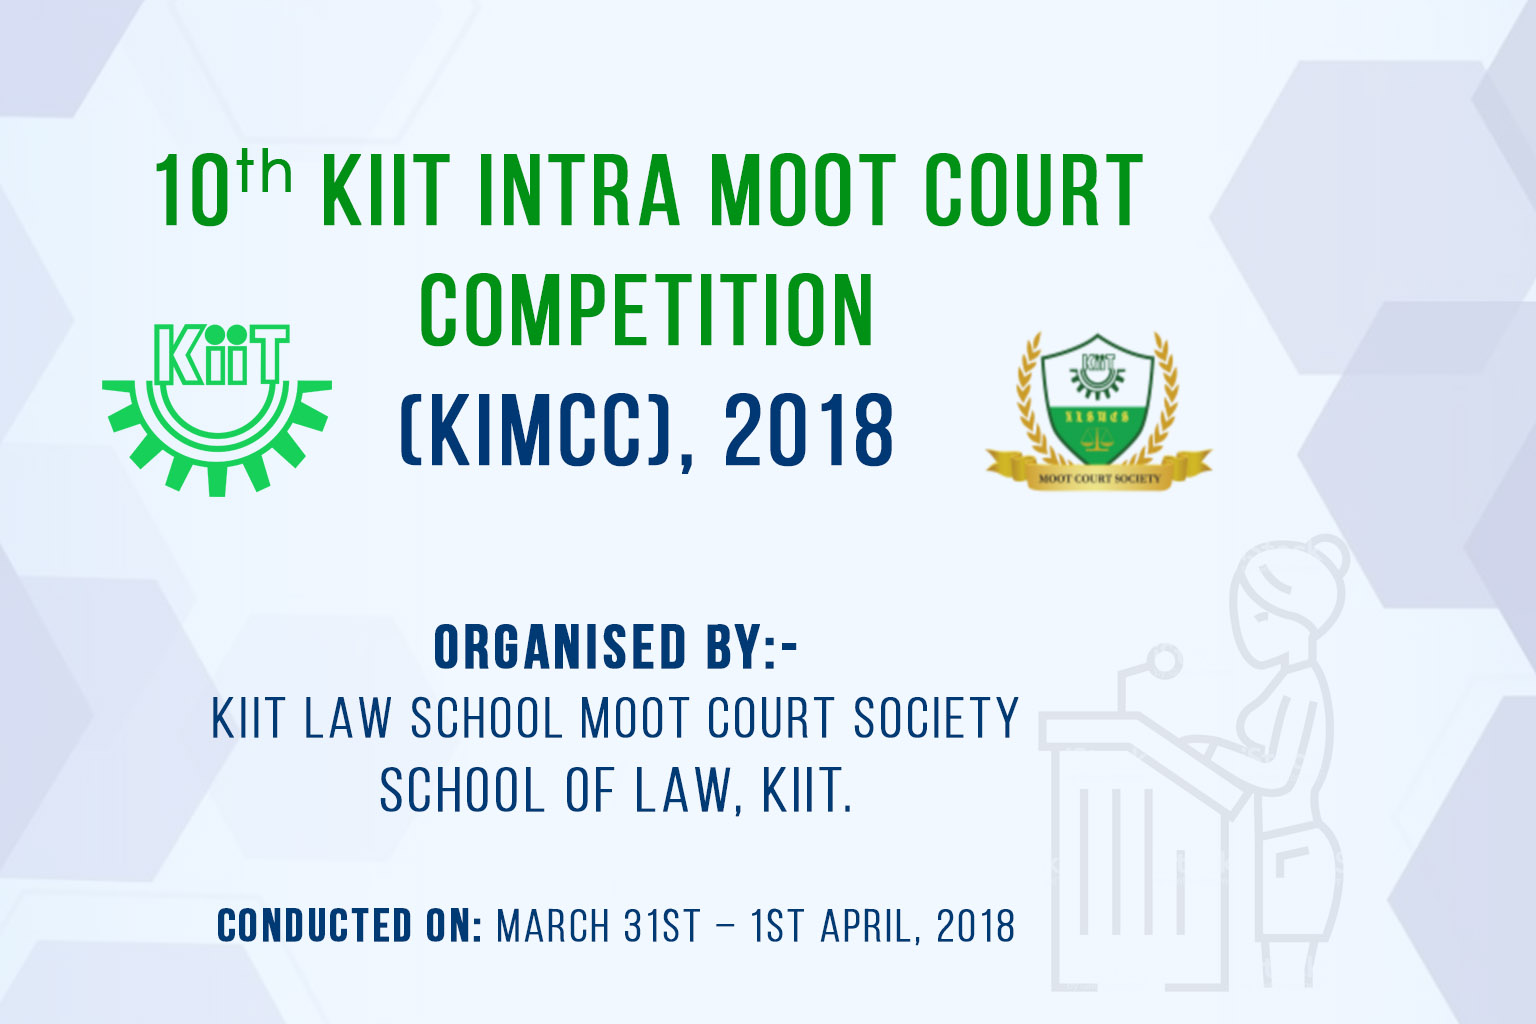 10TH KIIT INTRA MOOT COURT COMPETITION (KIMCC), 2018